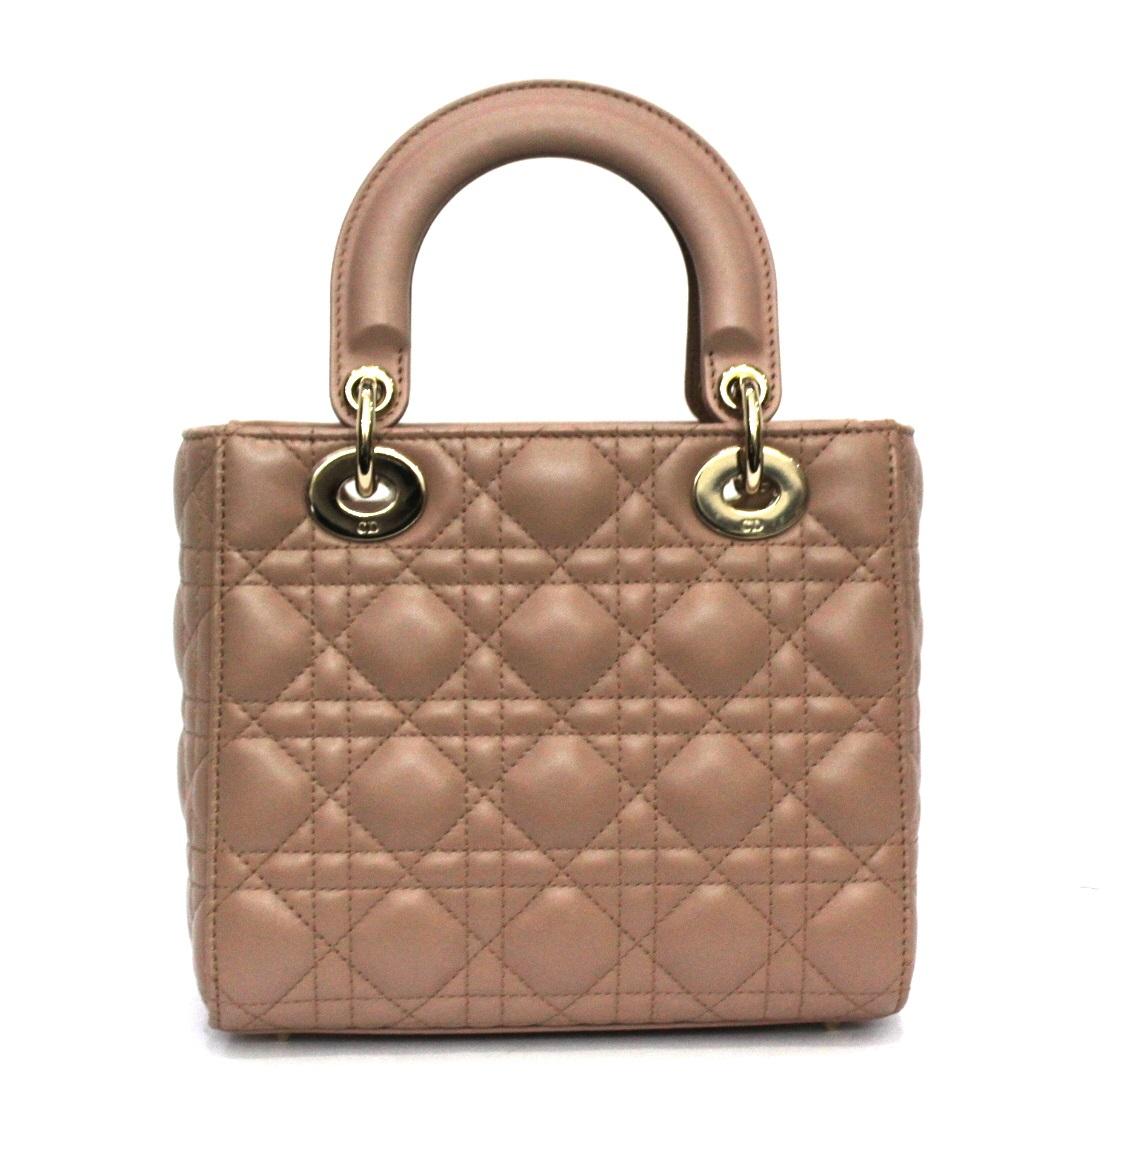 Dior Lady model bag made of soft powder-colored leather with golden hardware.

Equipped with double leather handle, flap closure, capacious inside for the essentials.

The bag is in excellent condition.